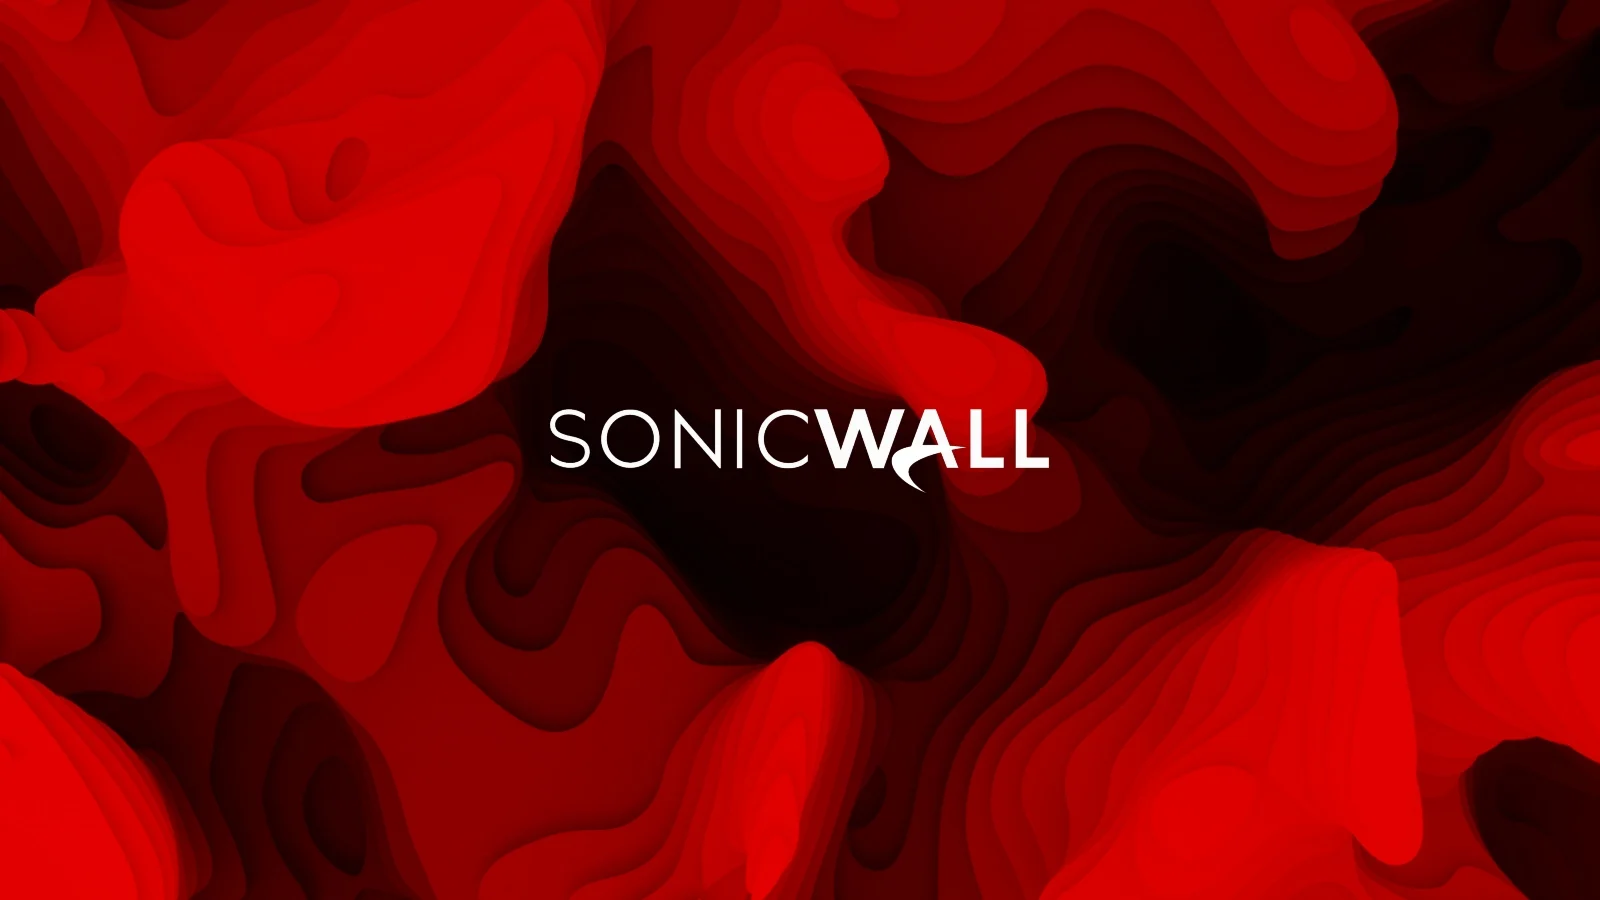 takian.ir over 178k sonicwall firewalls vulnerable to dos potential rce attacks 1